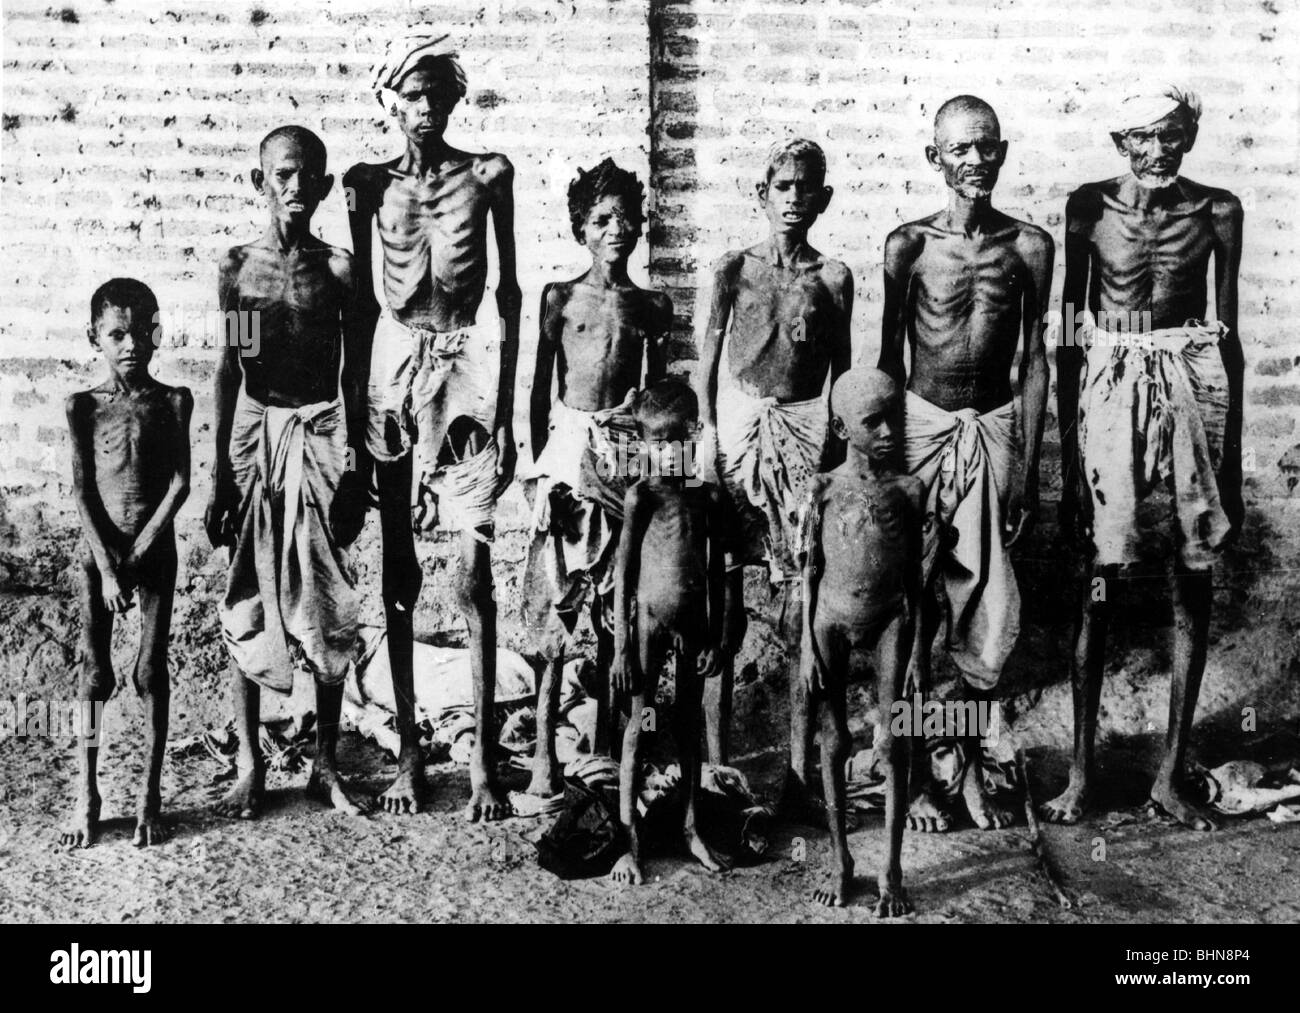 14800 Famine Stock Photos Pictures  RoyaltyFree Images  iStock